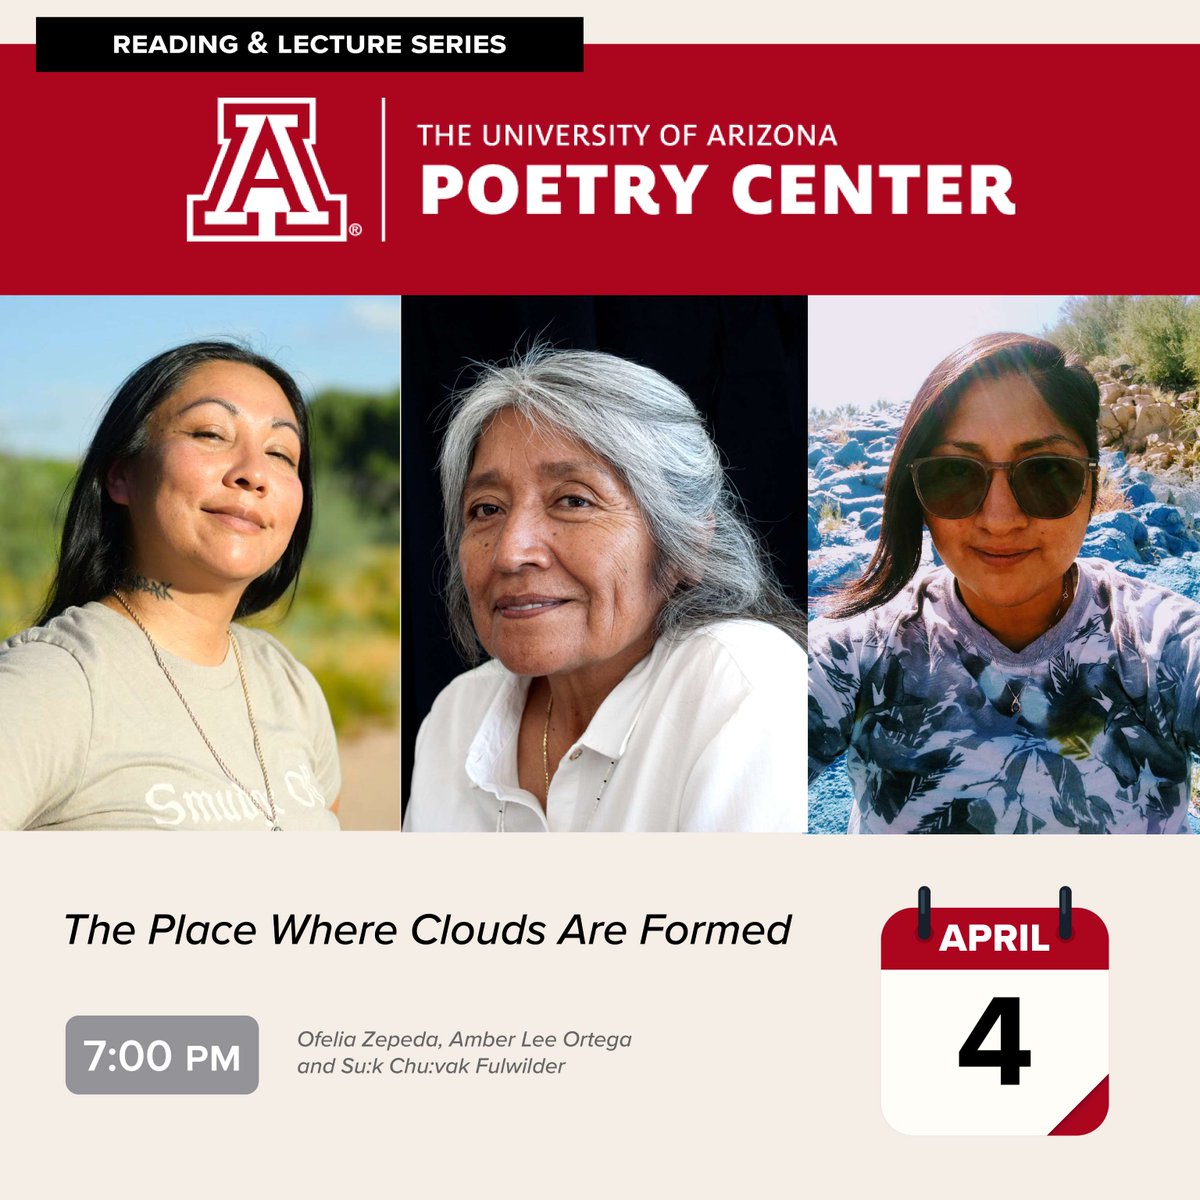 Tomorrow, join us in celebration of The Place Where Clouds Are Formed! The special reading features poets Ofelia Zepeda, Amber Lee Ortega and Su:k Chu:vak Fulwilder. poetry.arizona.edu/calendar/place…